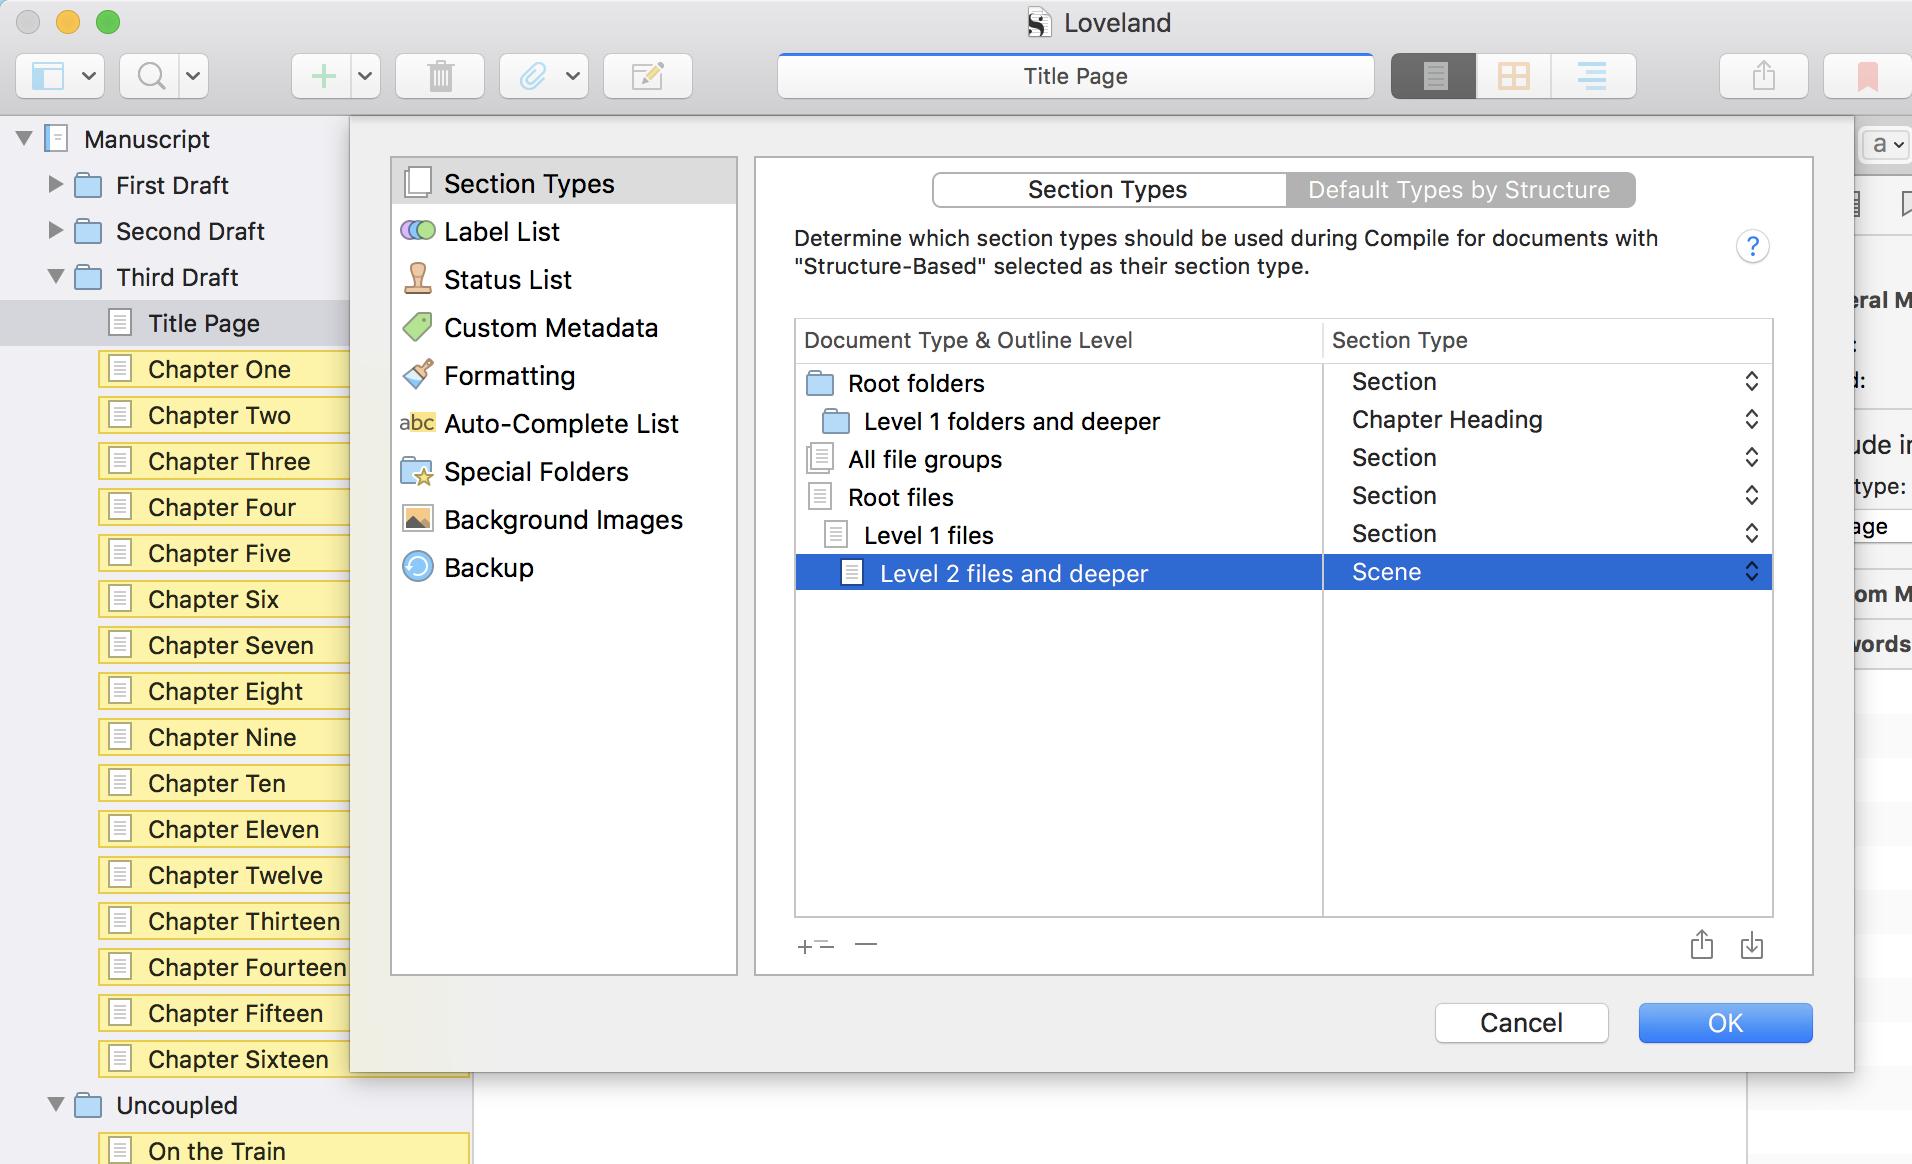 Selecting default types by structure in Scrivener.